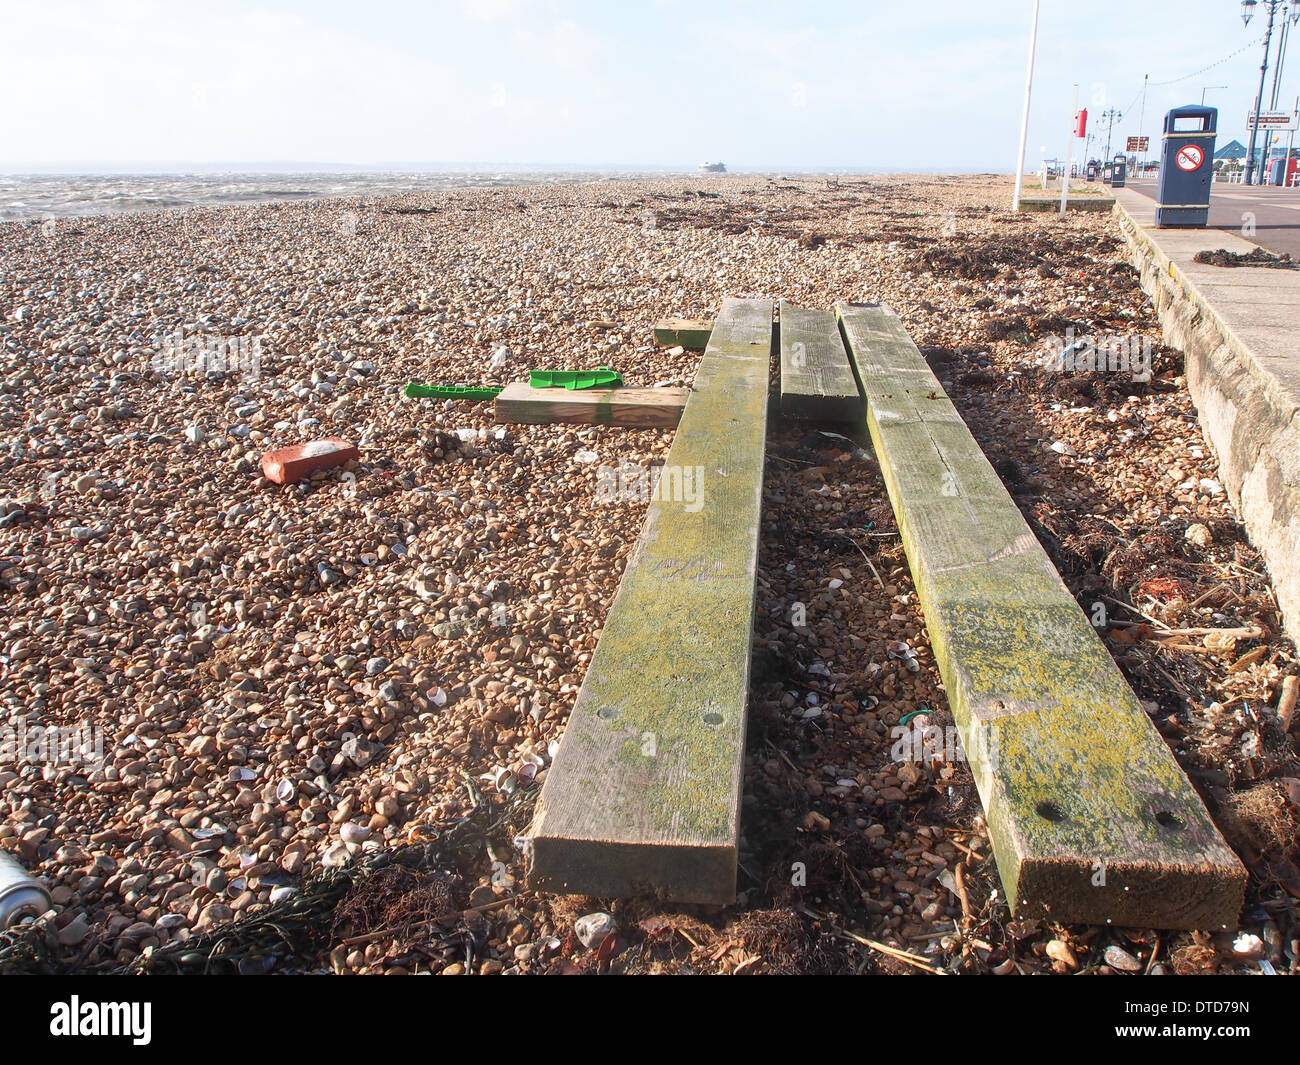 Portsmouth, Hampshire, England 15th February 2014Wood from the Damaged south Parade Pier lies along the beach after high winds and strong tides battered the pier overnight causing further structural damage. the pier has been closed to the public due to structural safety issues for over a year Credit:  simon evans/Alamy Live News Stock Photo